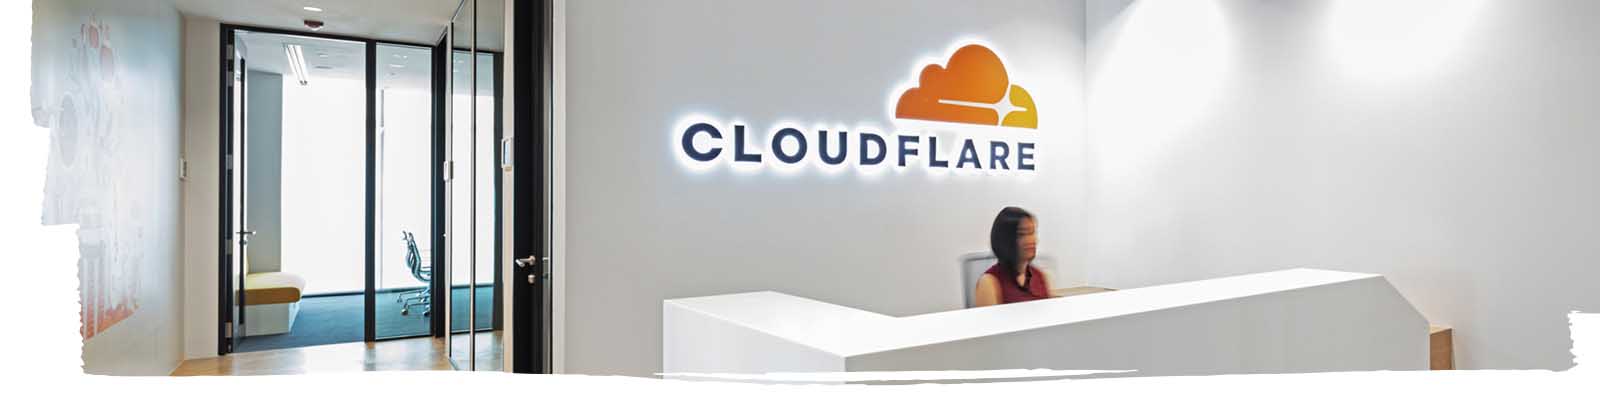 Cloudflare’s new workplac reception area